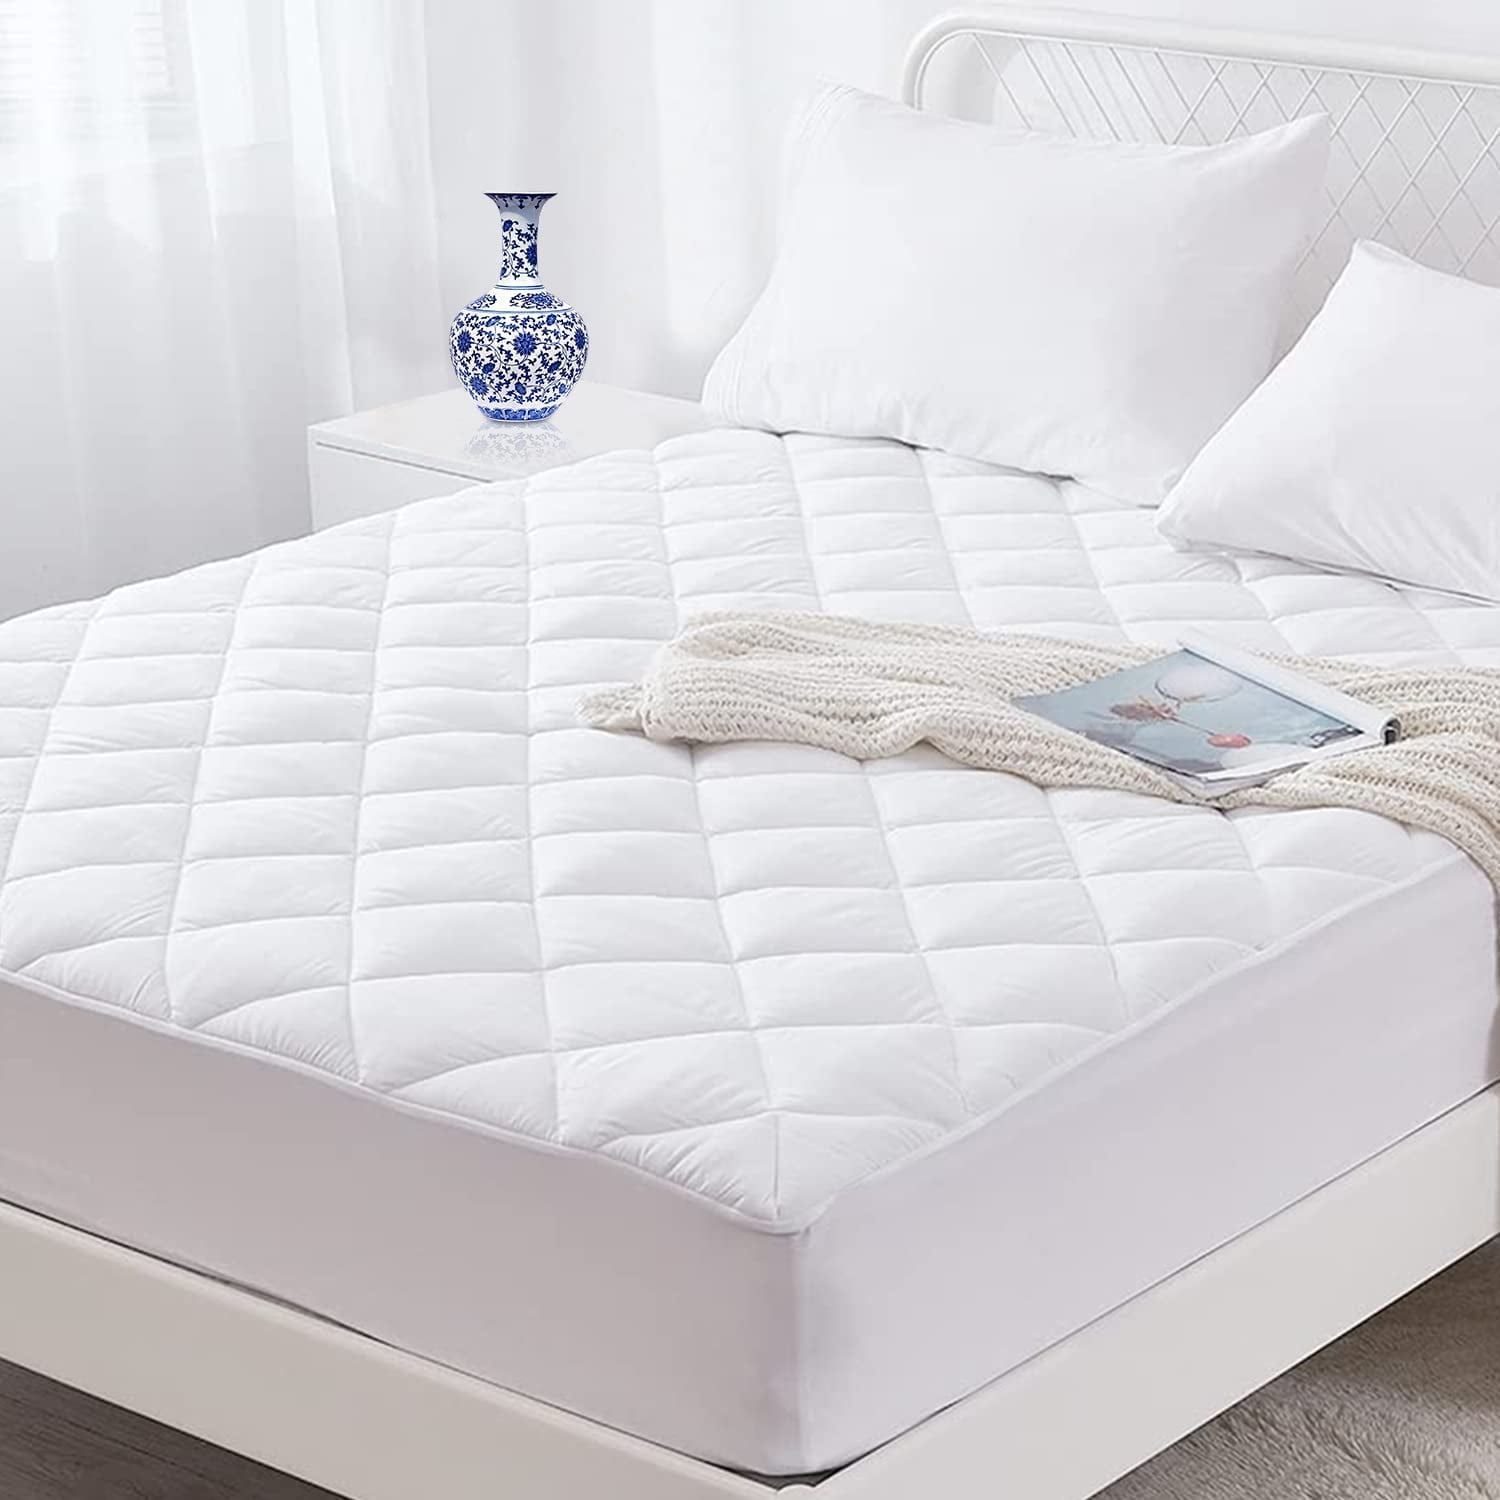 1 new bedding bedroom quilted fitted mattress pad cover twin cotton polyester 